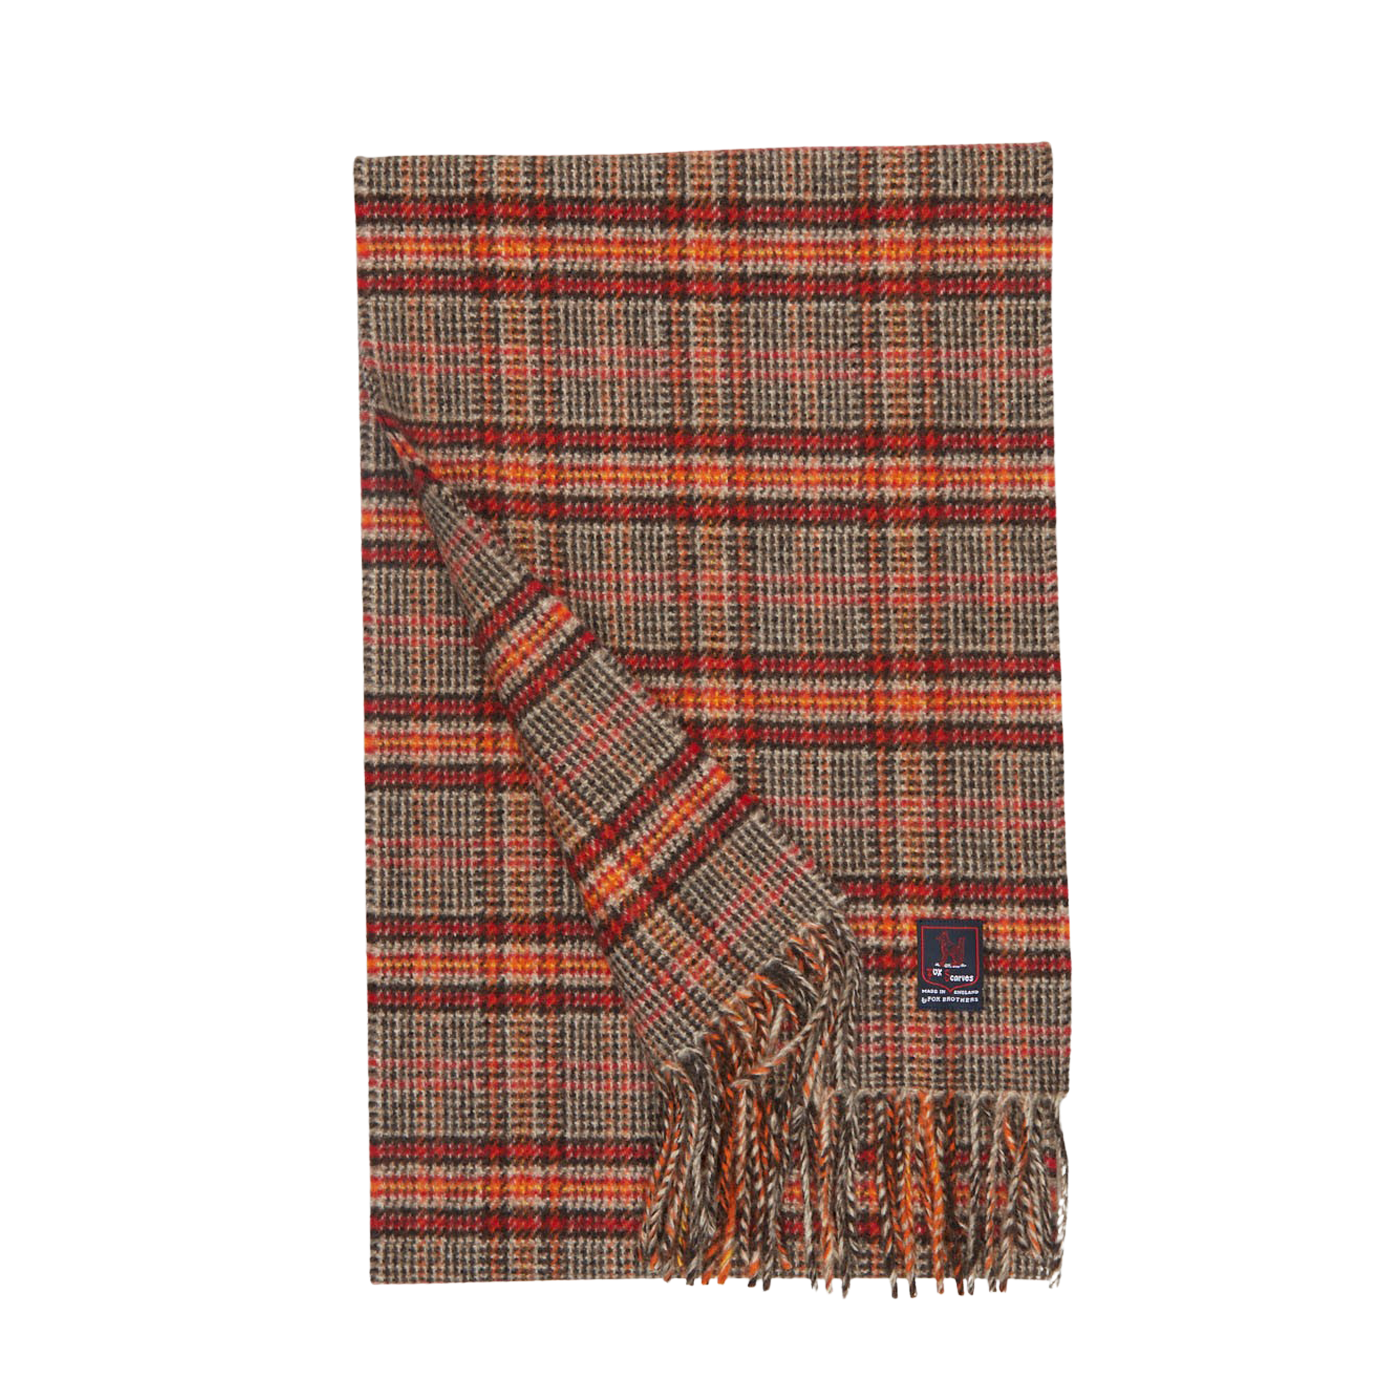 A Negroni Checked Lambswool Cashmere Scarf knitted in England by Fox Brothers, featuring fringes on a white background.